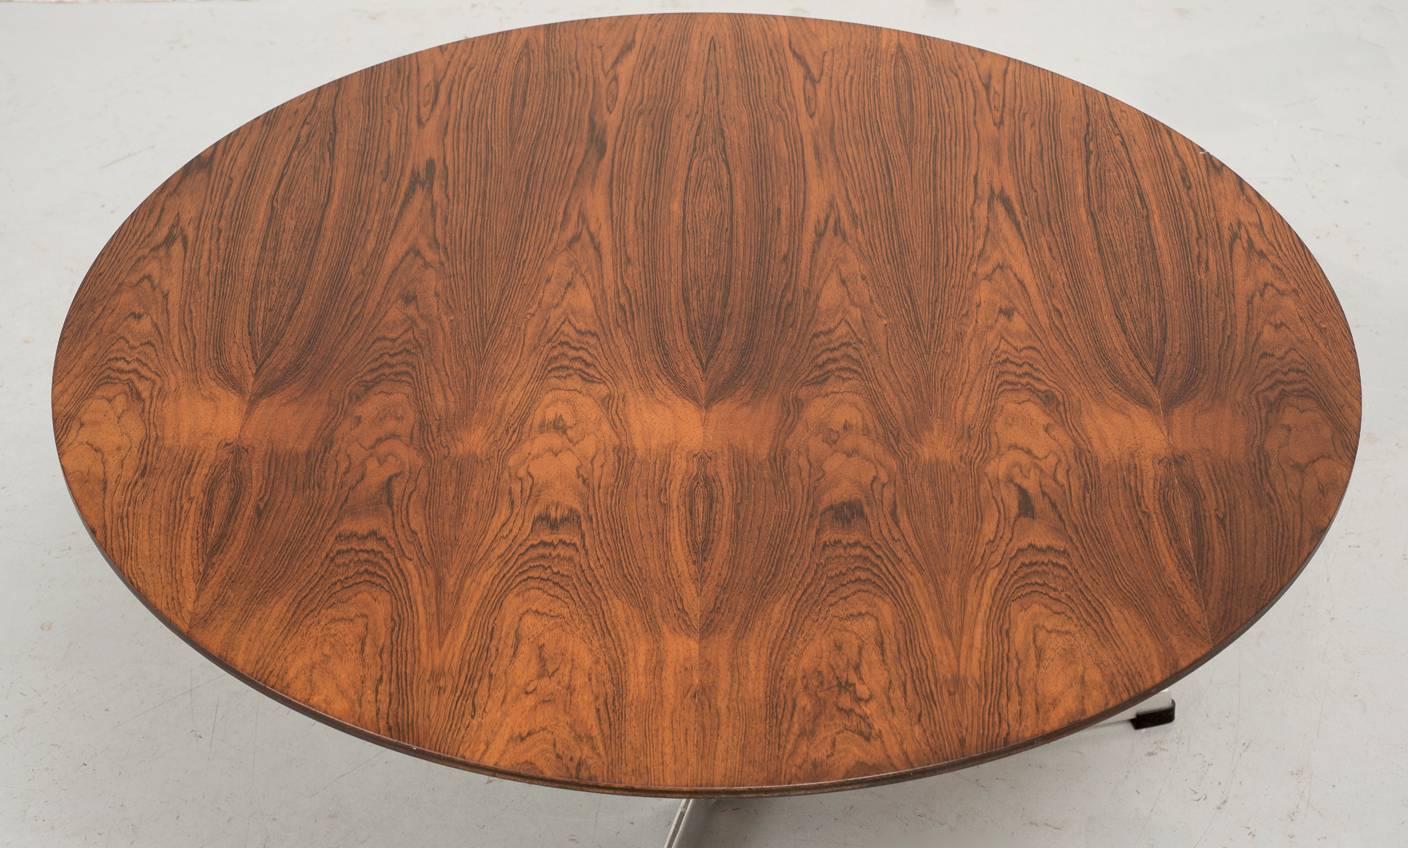 Stunning Brazilian rosewood coffee table by Arne Jacobsen for Fritz Hansen, circa 1960s. This example with dramatic wood grain on rosewood top and early tripod base.